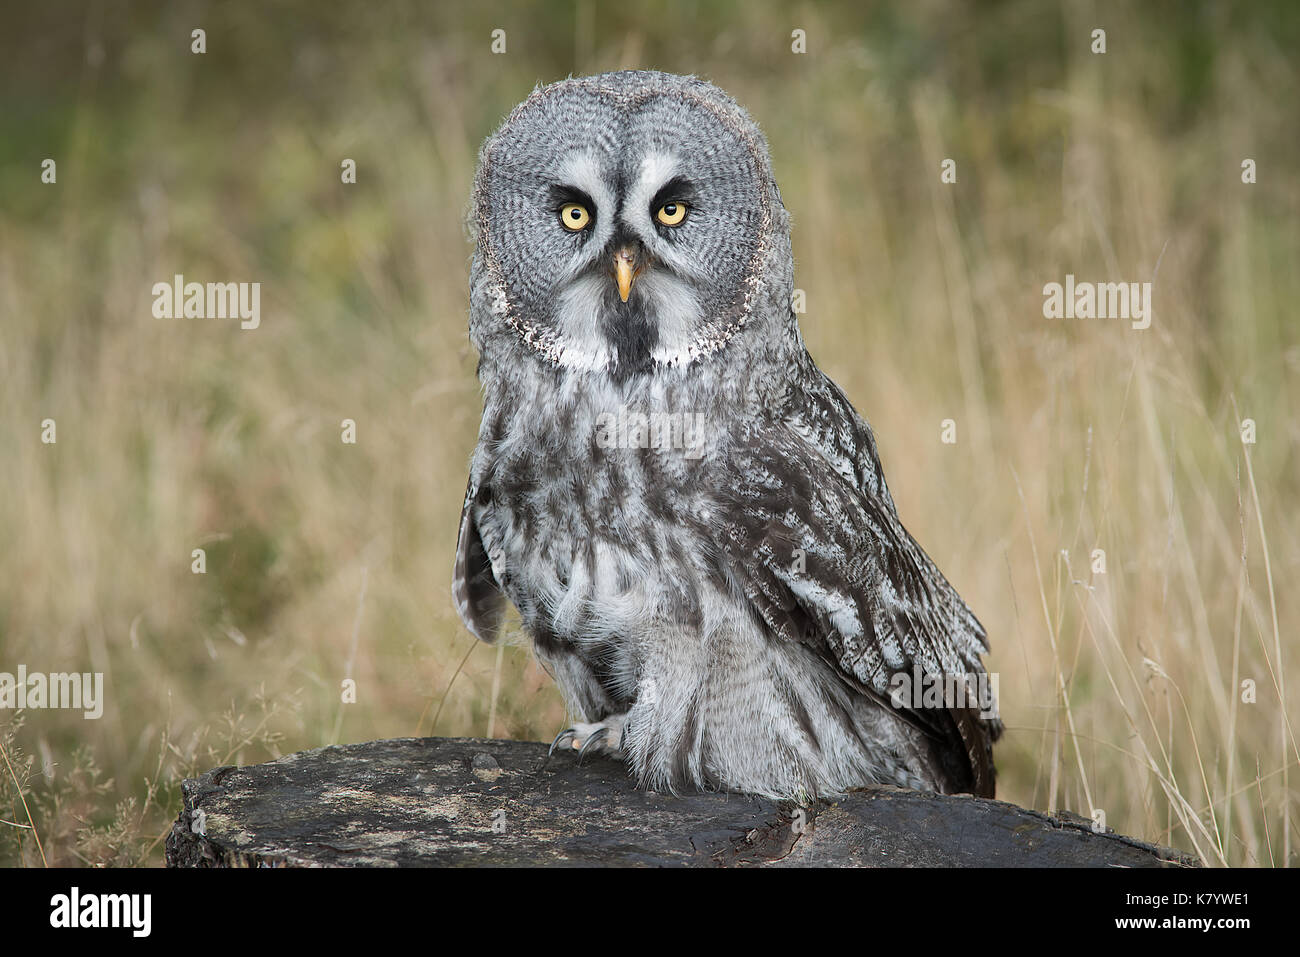 A full length portrait of a great grey owl perched on a tree stump staring forward at the camera Stock Photo